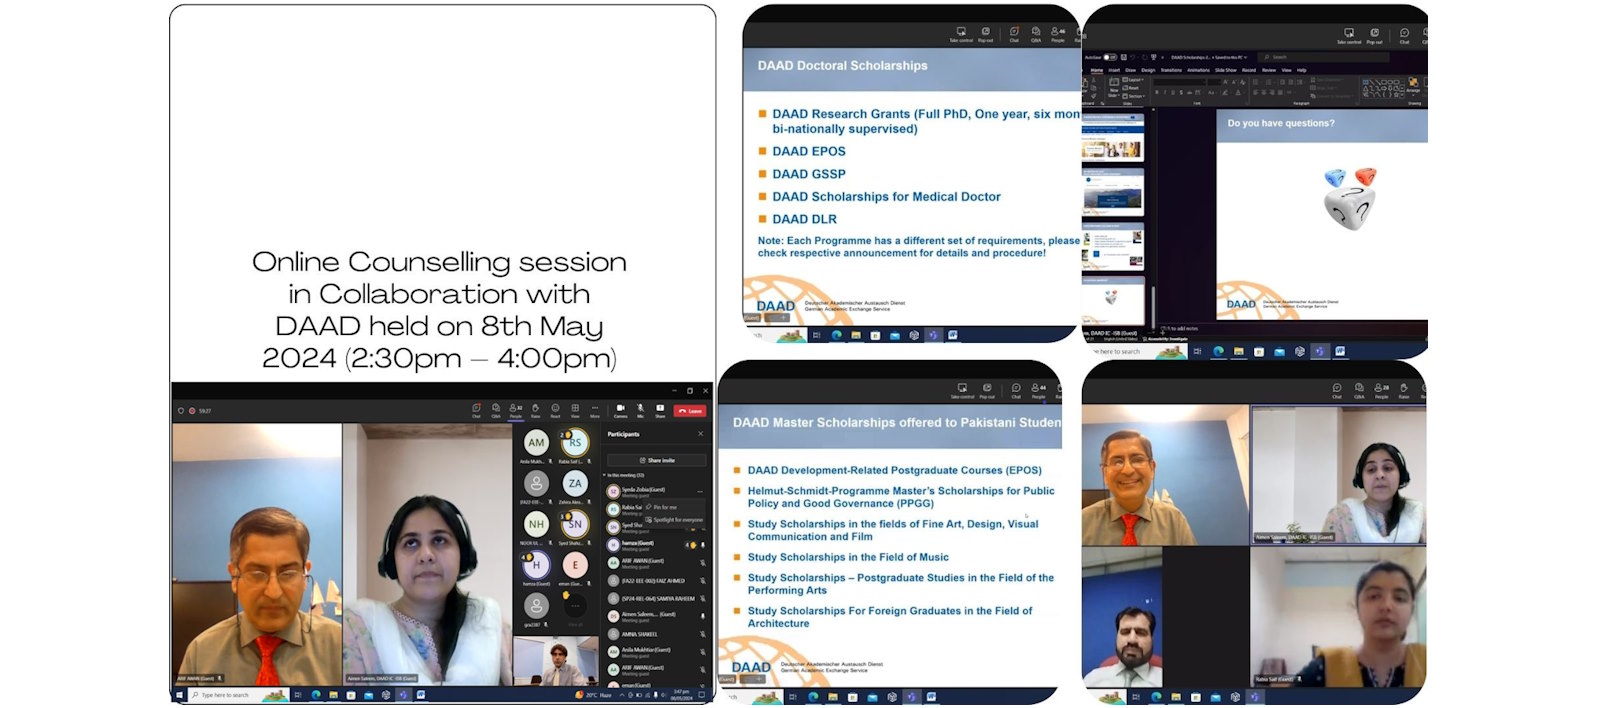 Online Student Counselling Session on 8th May 2024